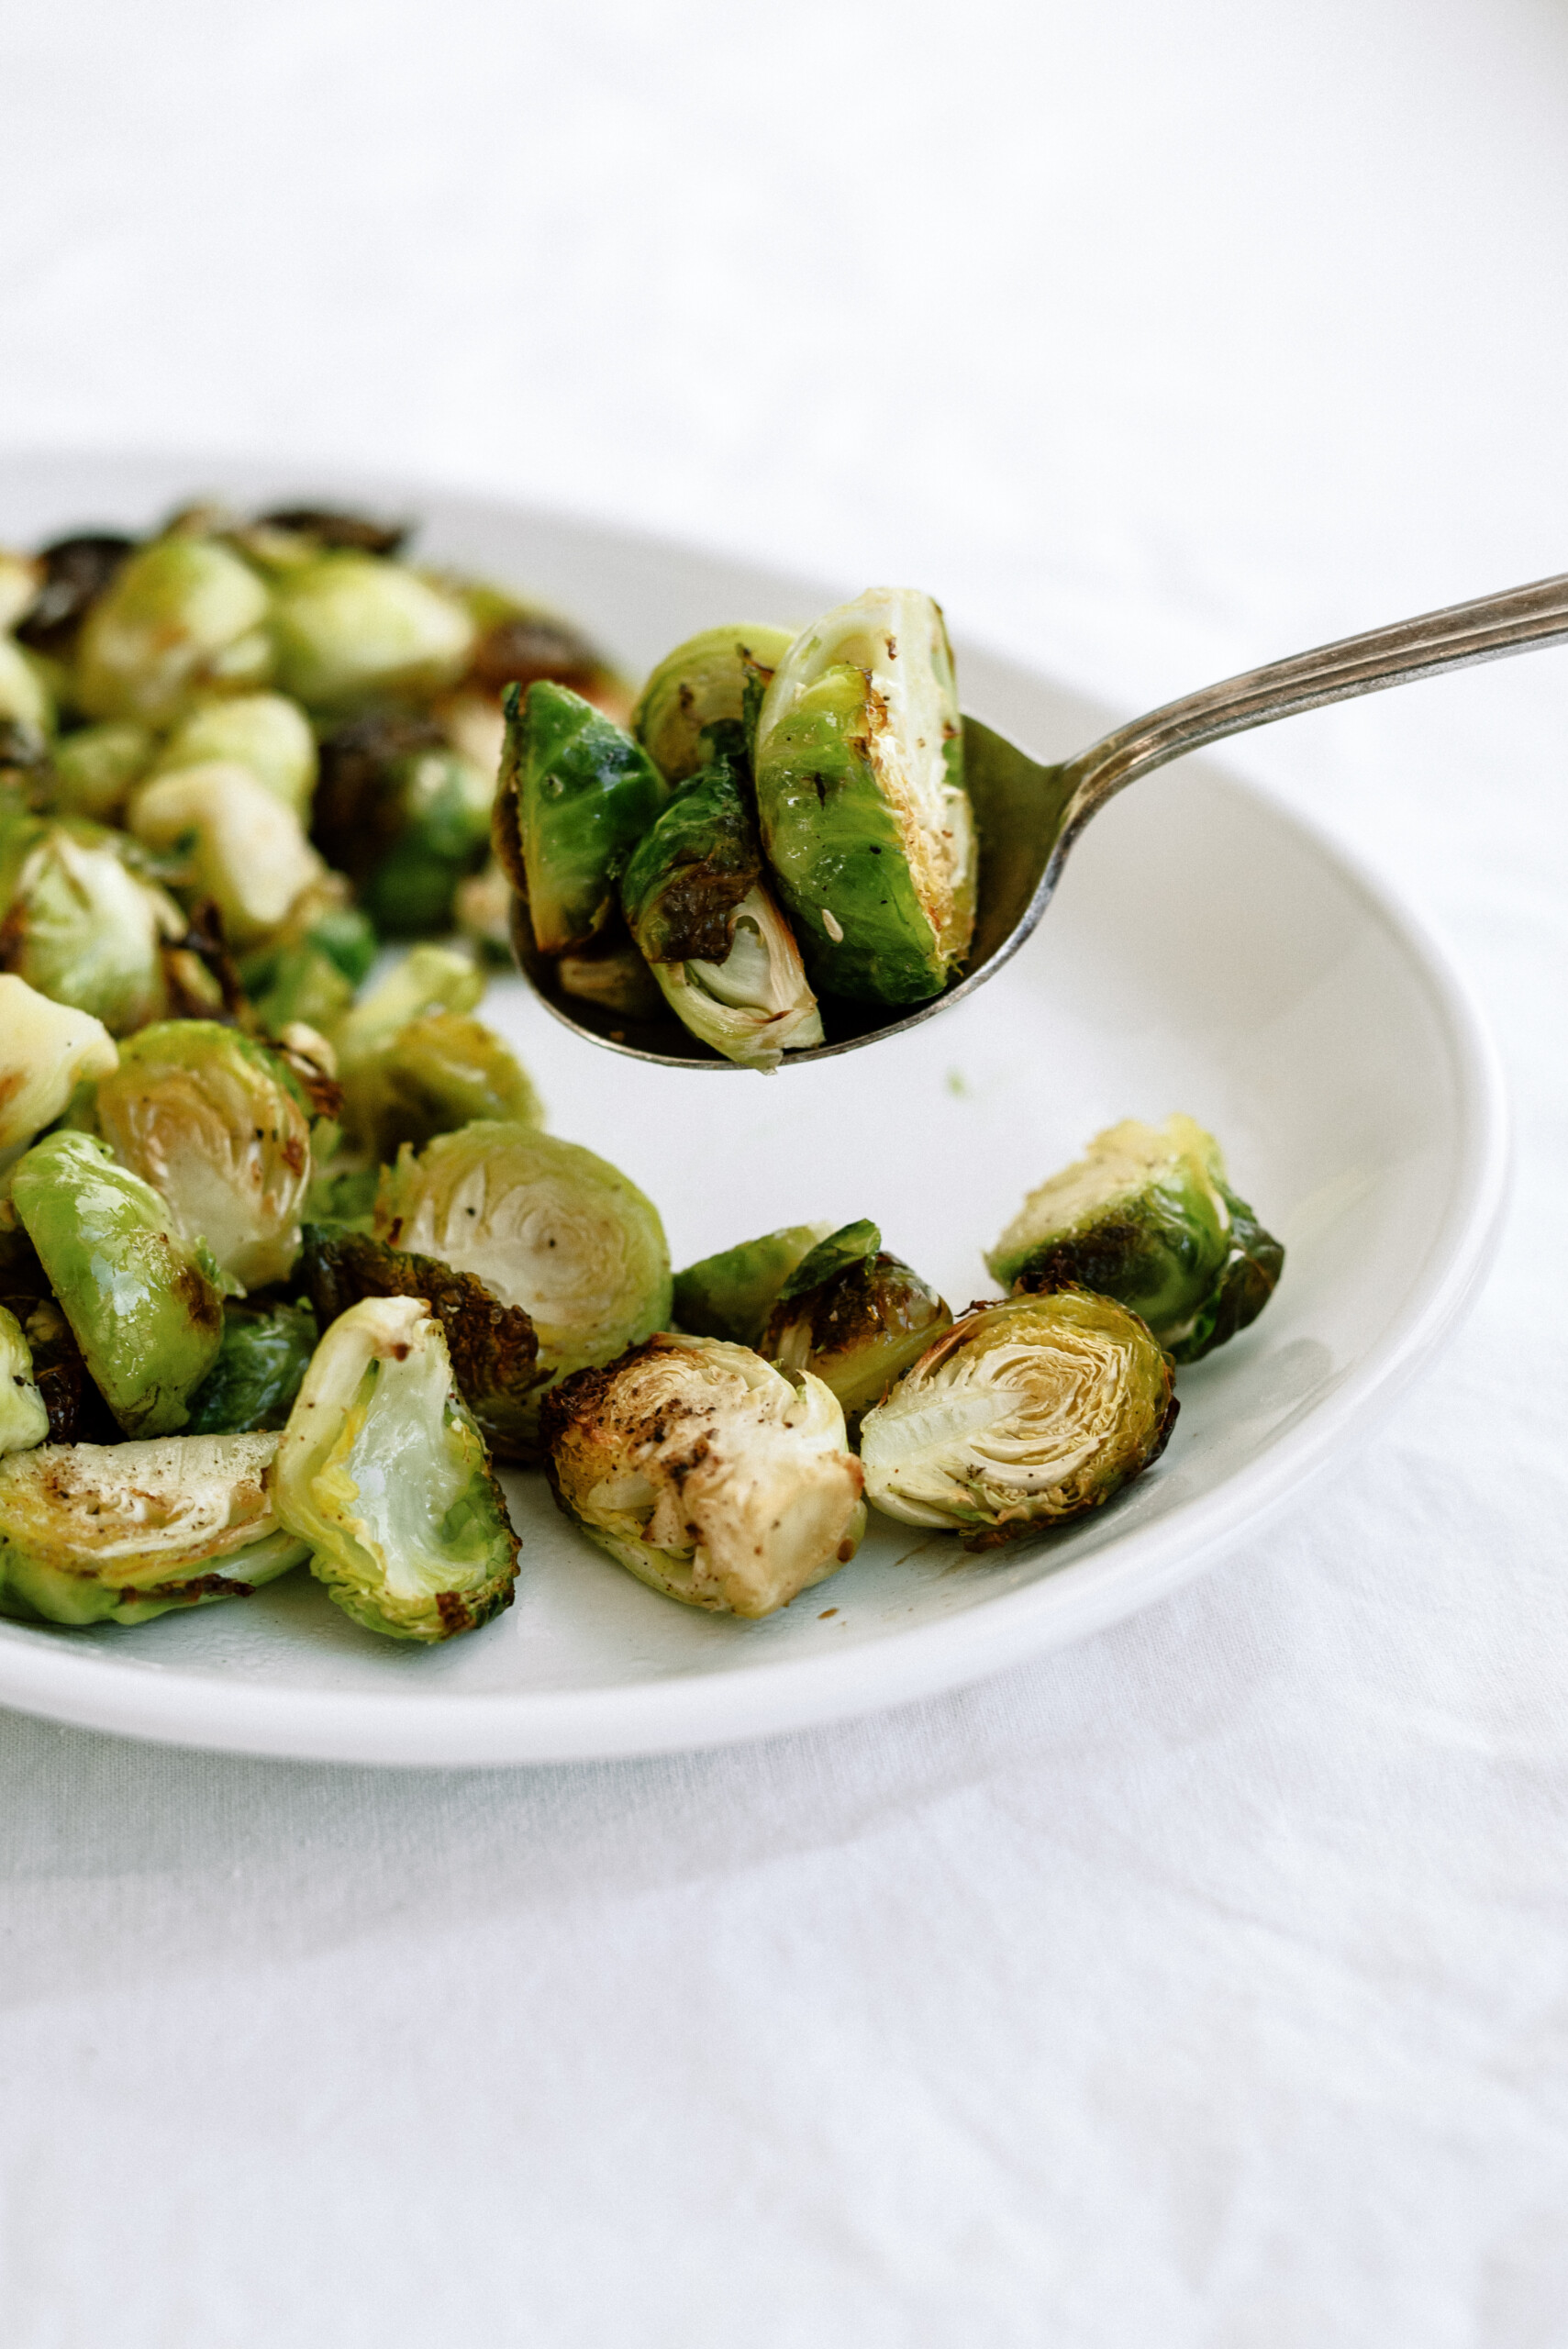 a spoon scooping up baked brussel sprouts